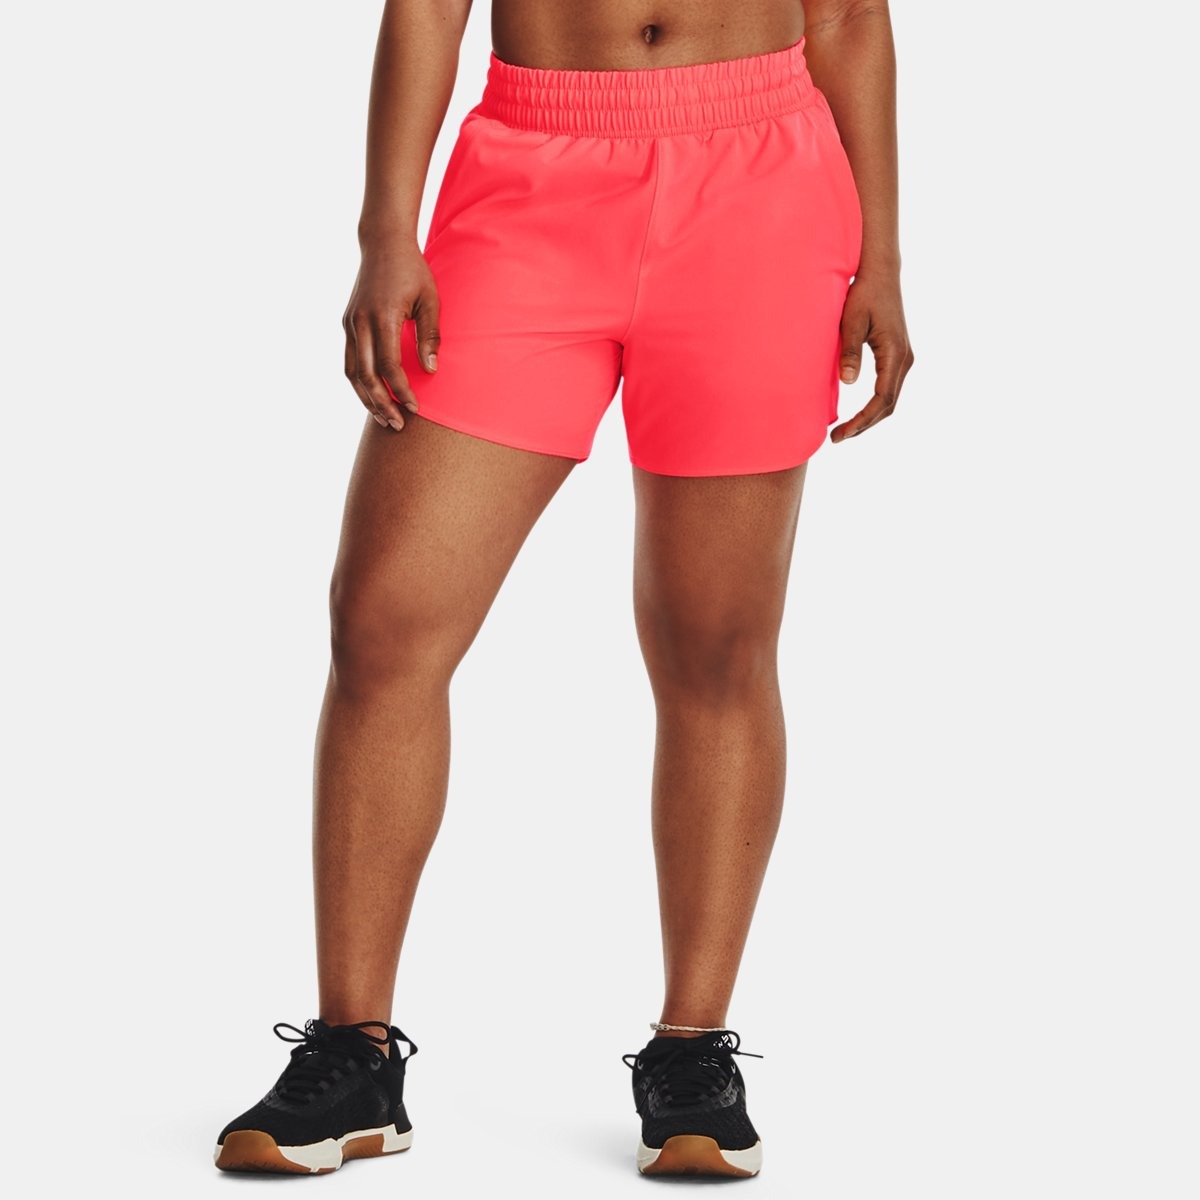 Woman Shorts Red at Under Armour GOOFASH